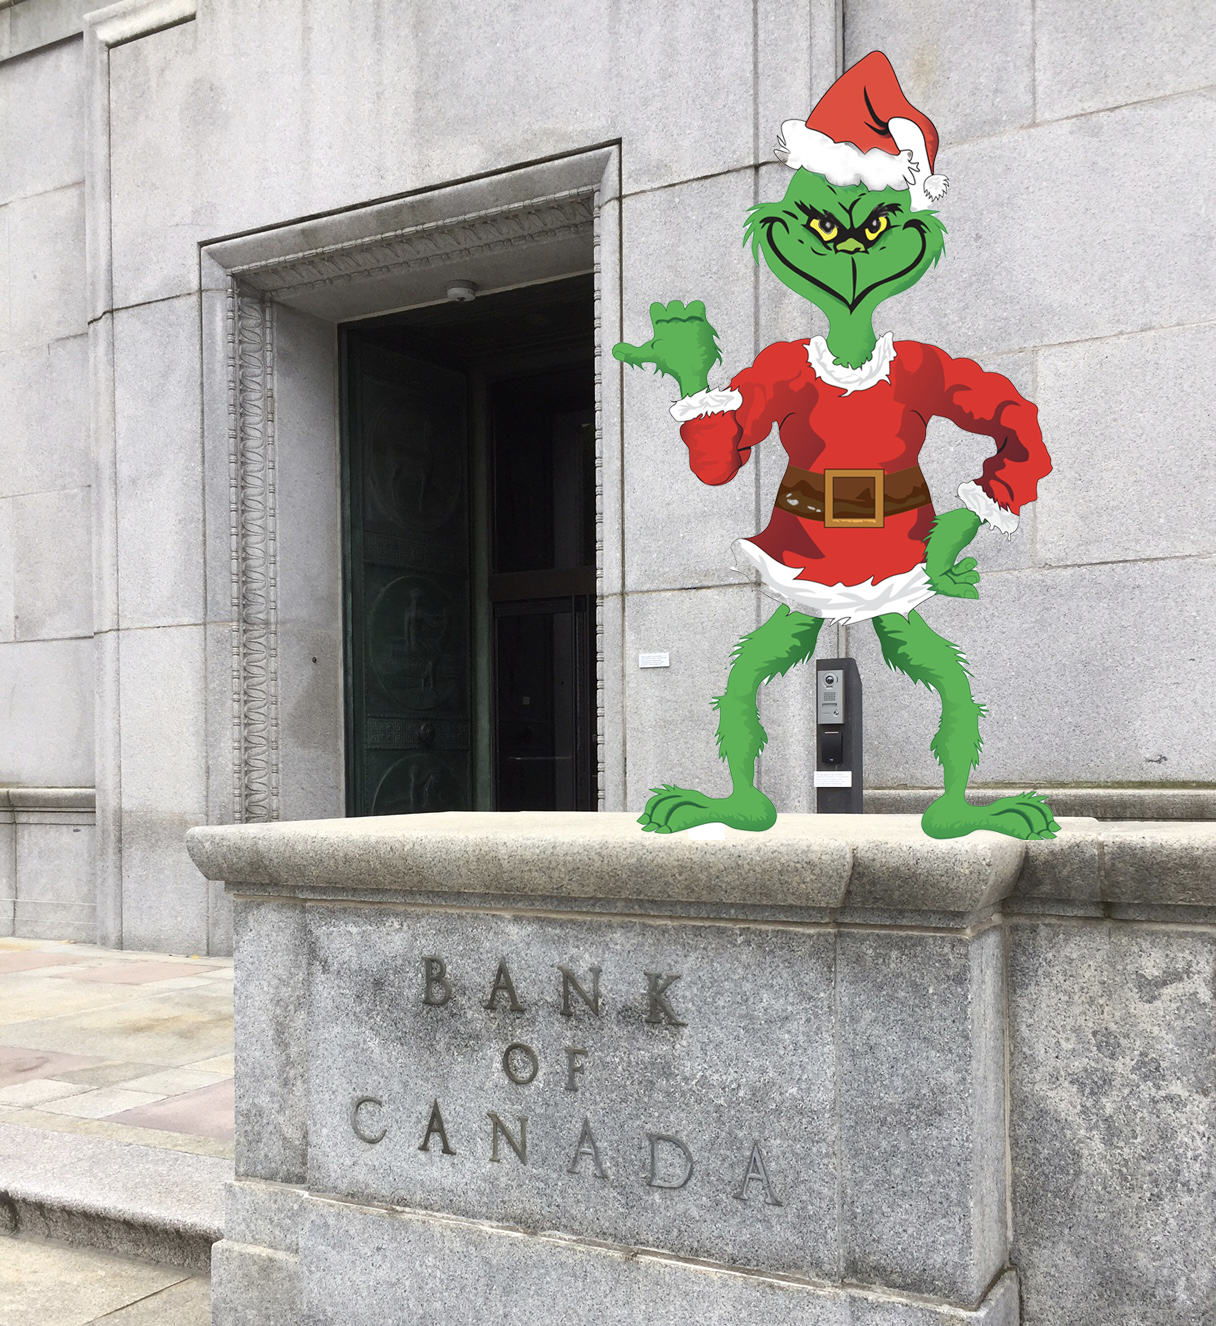 The BoC Might Have to Play Grinch, At Least One More Time